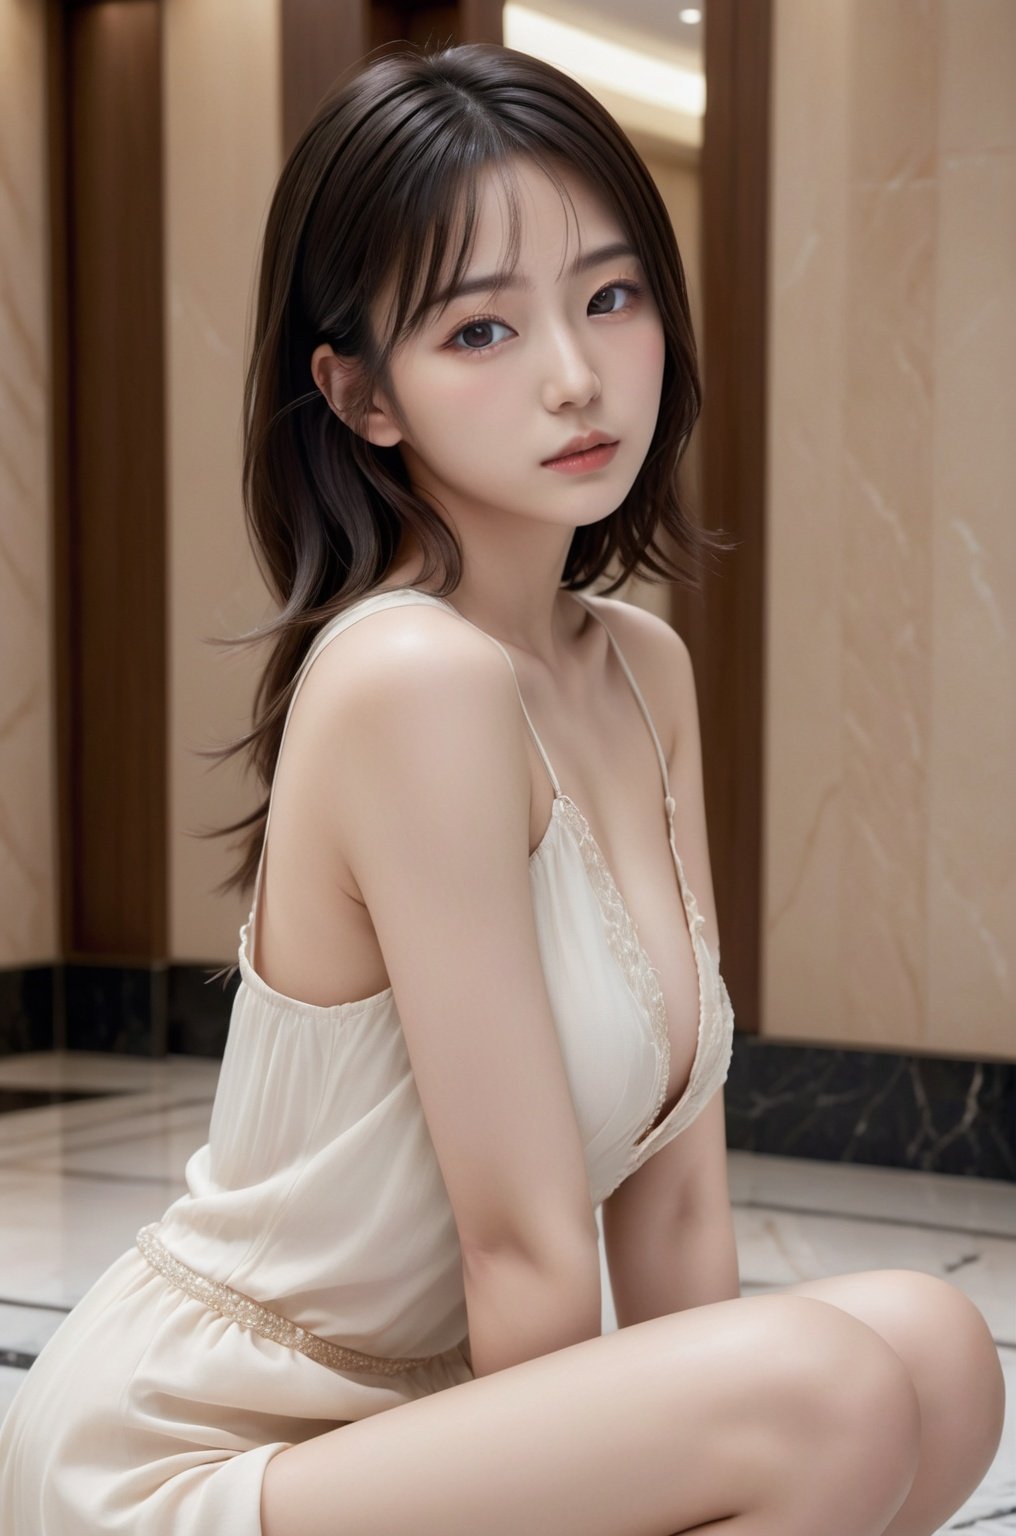 jpn-girl, Professional portrait photography of the face of a beautiful girl with (glossy nude lips) with black eyes, Nikon Z9, looking at the camera, realistic matte skin, highly detailed, skin texture visible, 20 yo,woman wearing dress,blurry background, 
Luxury hotel lobby with marble floors,
,